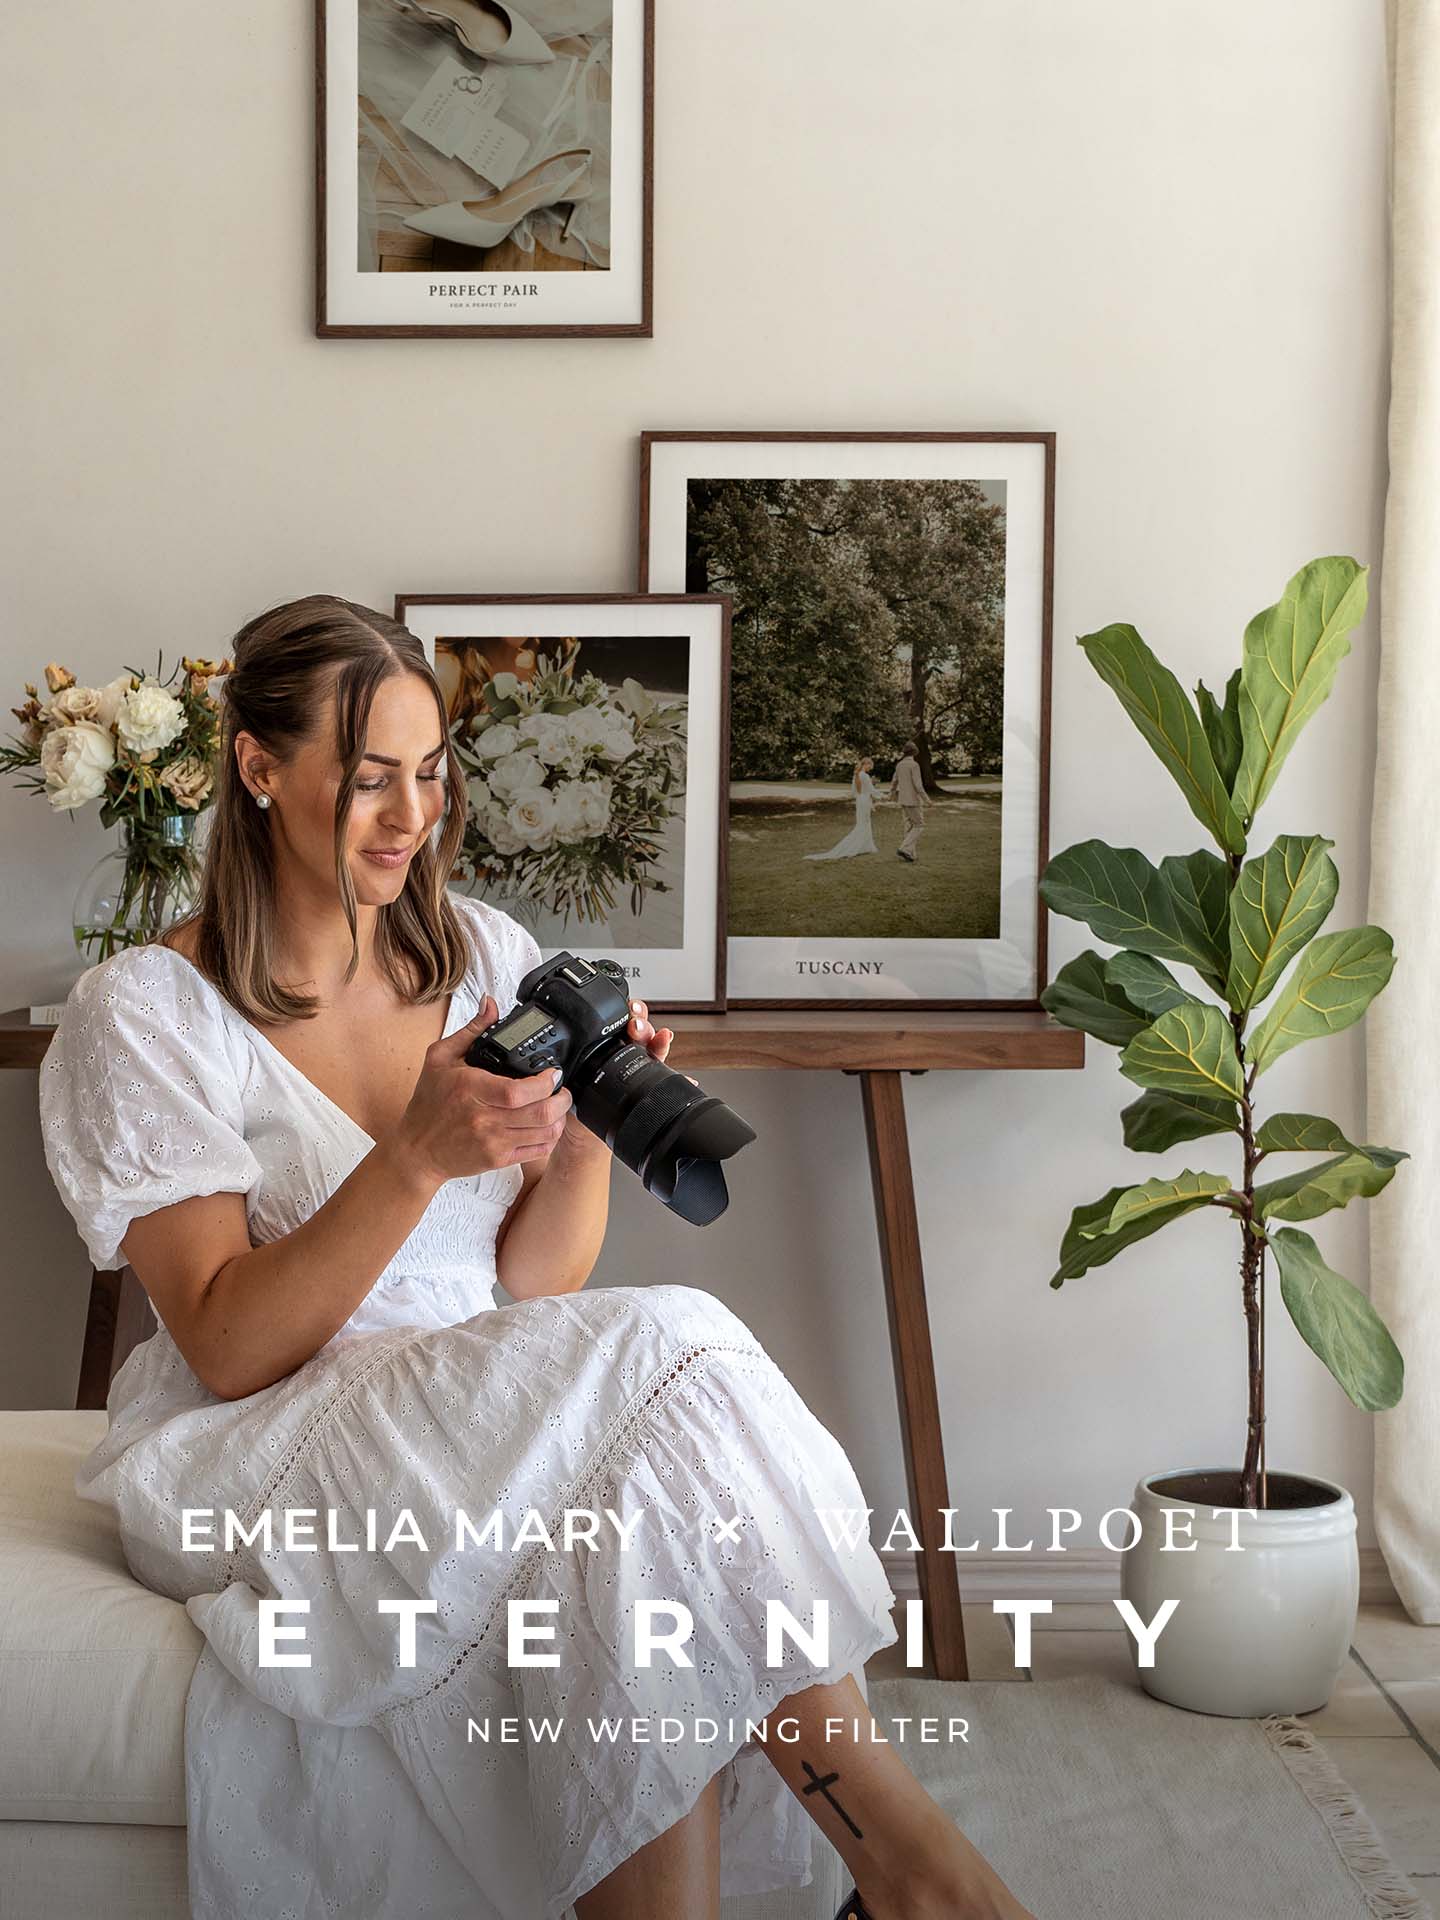 Woman with camera illustrating the launch of new wedding filter Eternity